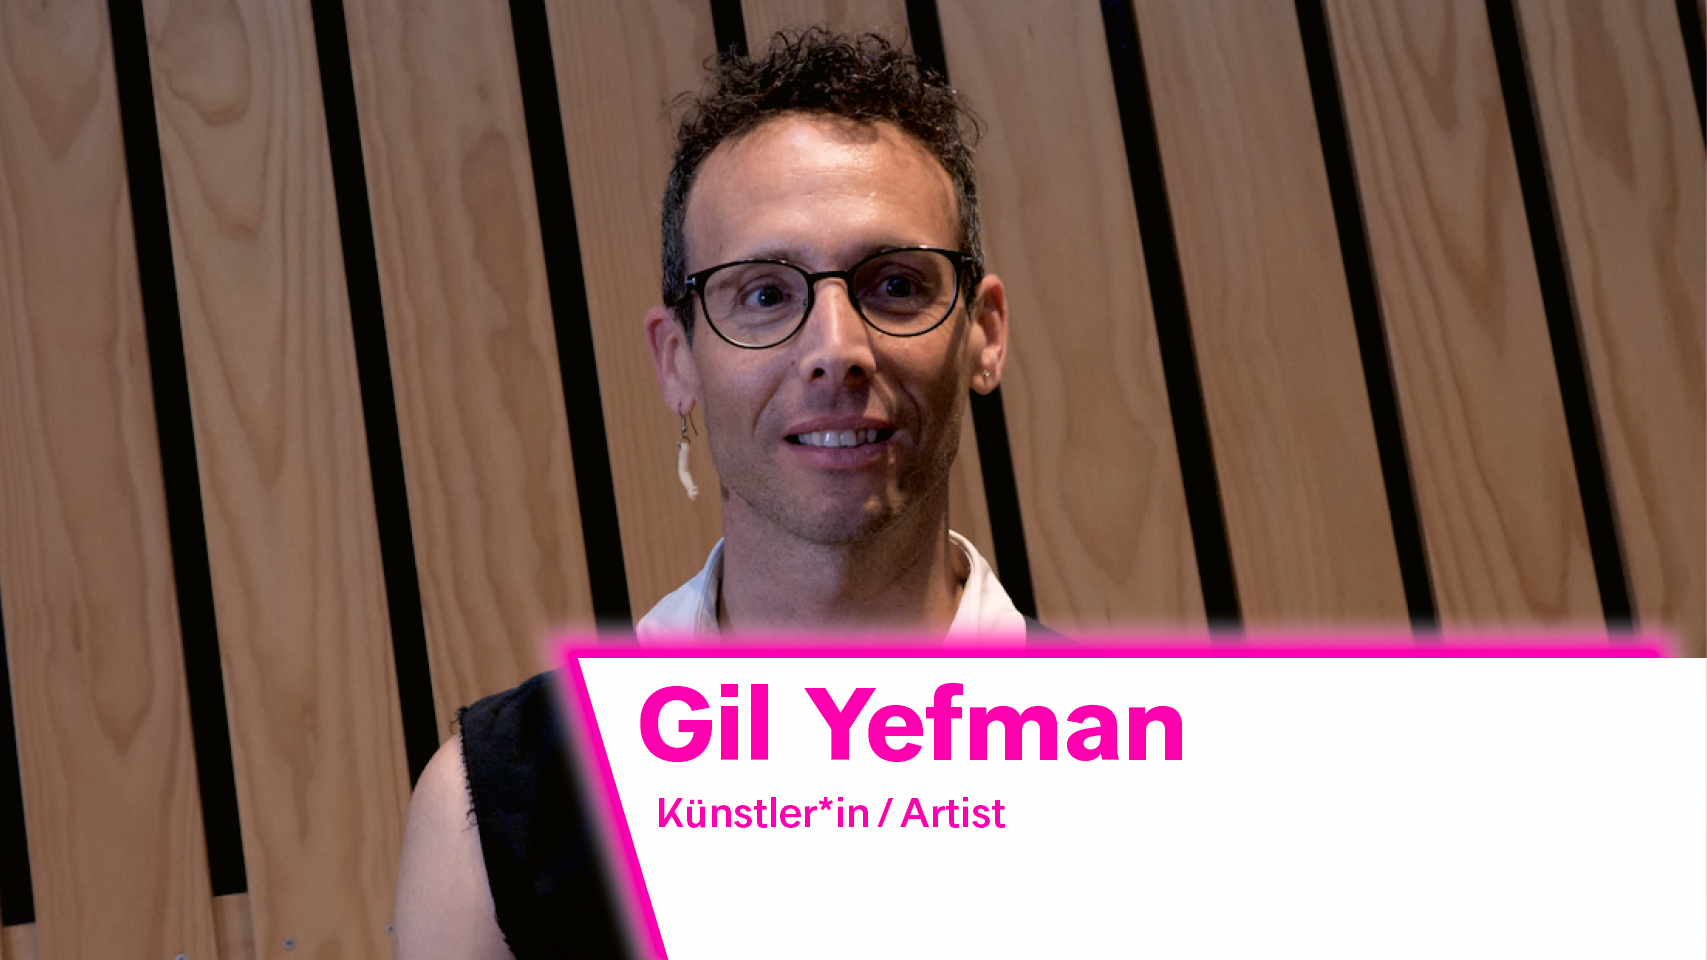 The image shows a portrait of artist Gil Yefman.